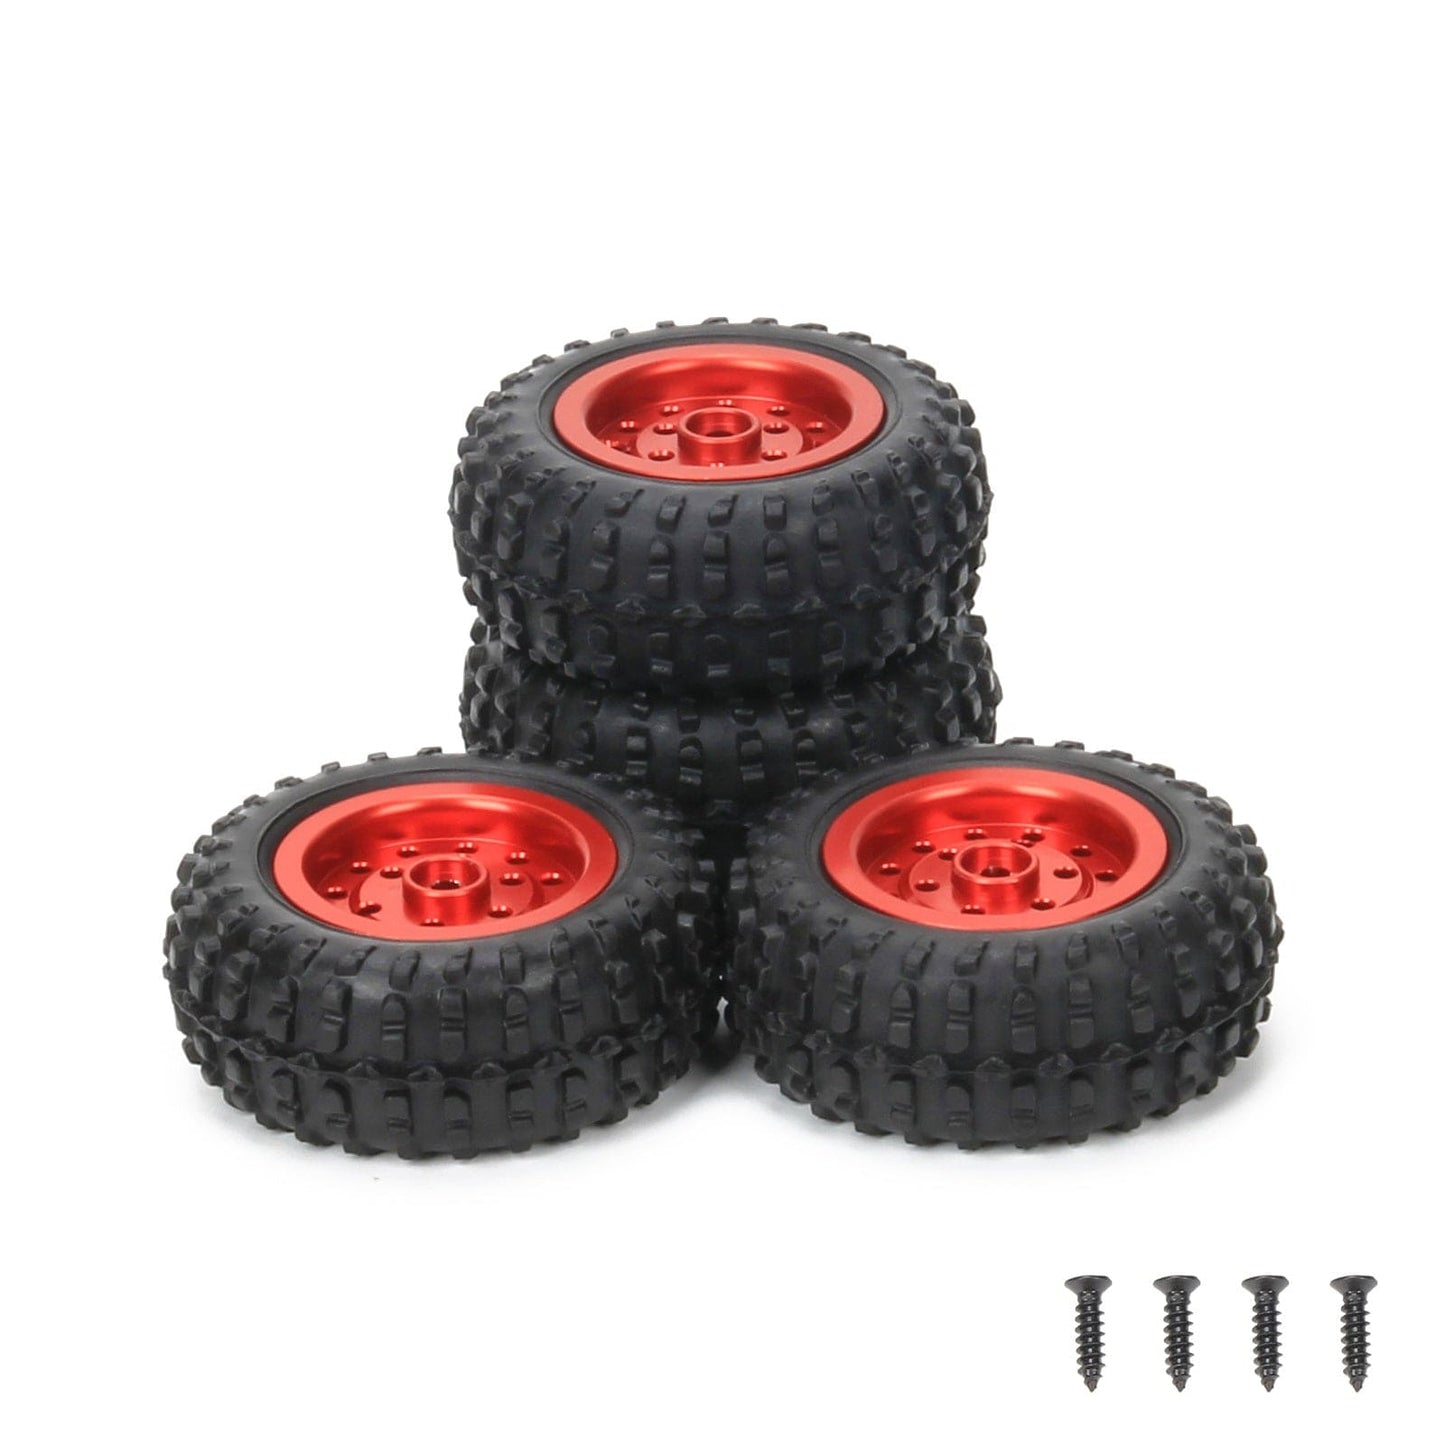 RCAWD WPL D12 18-holes Style RCAWD 50mm Alloy Wheel Rubber Tire for RC WPL D12 Drift Truck